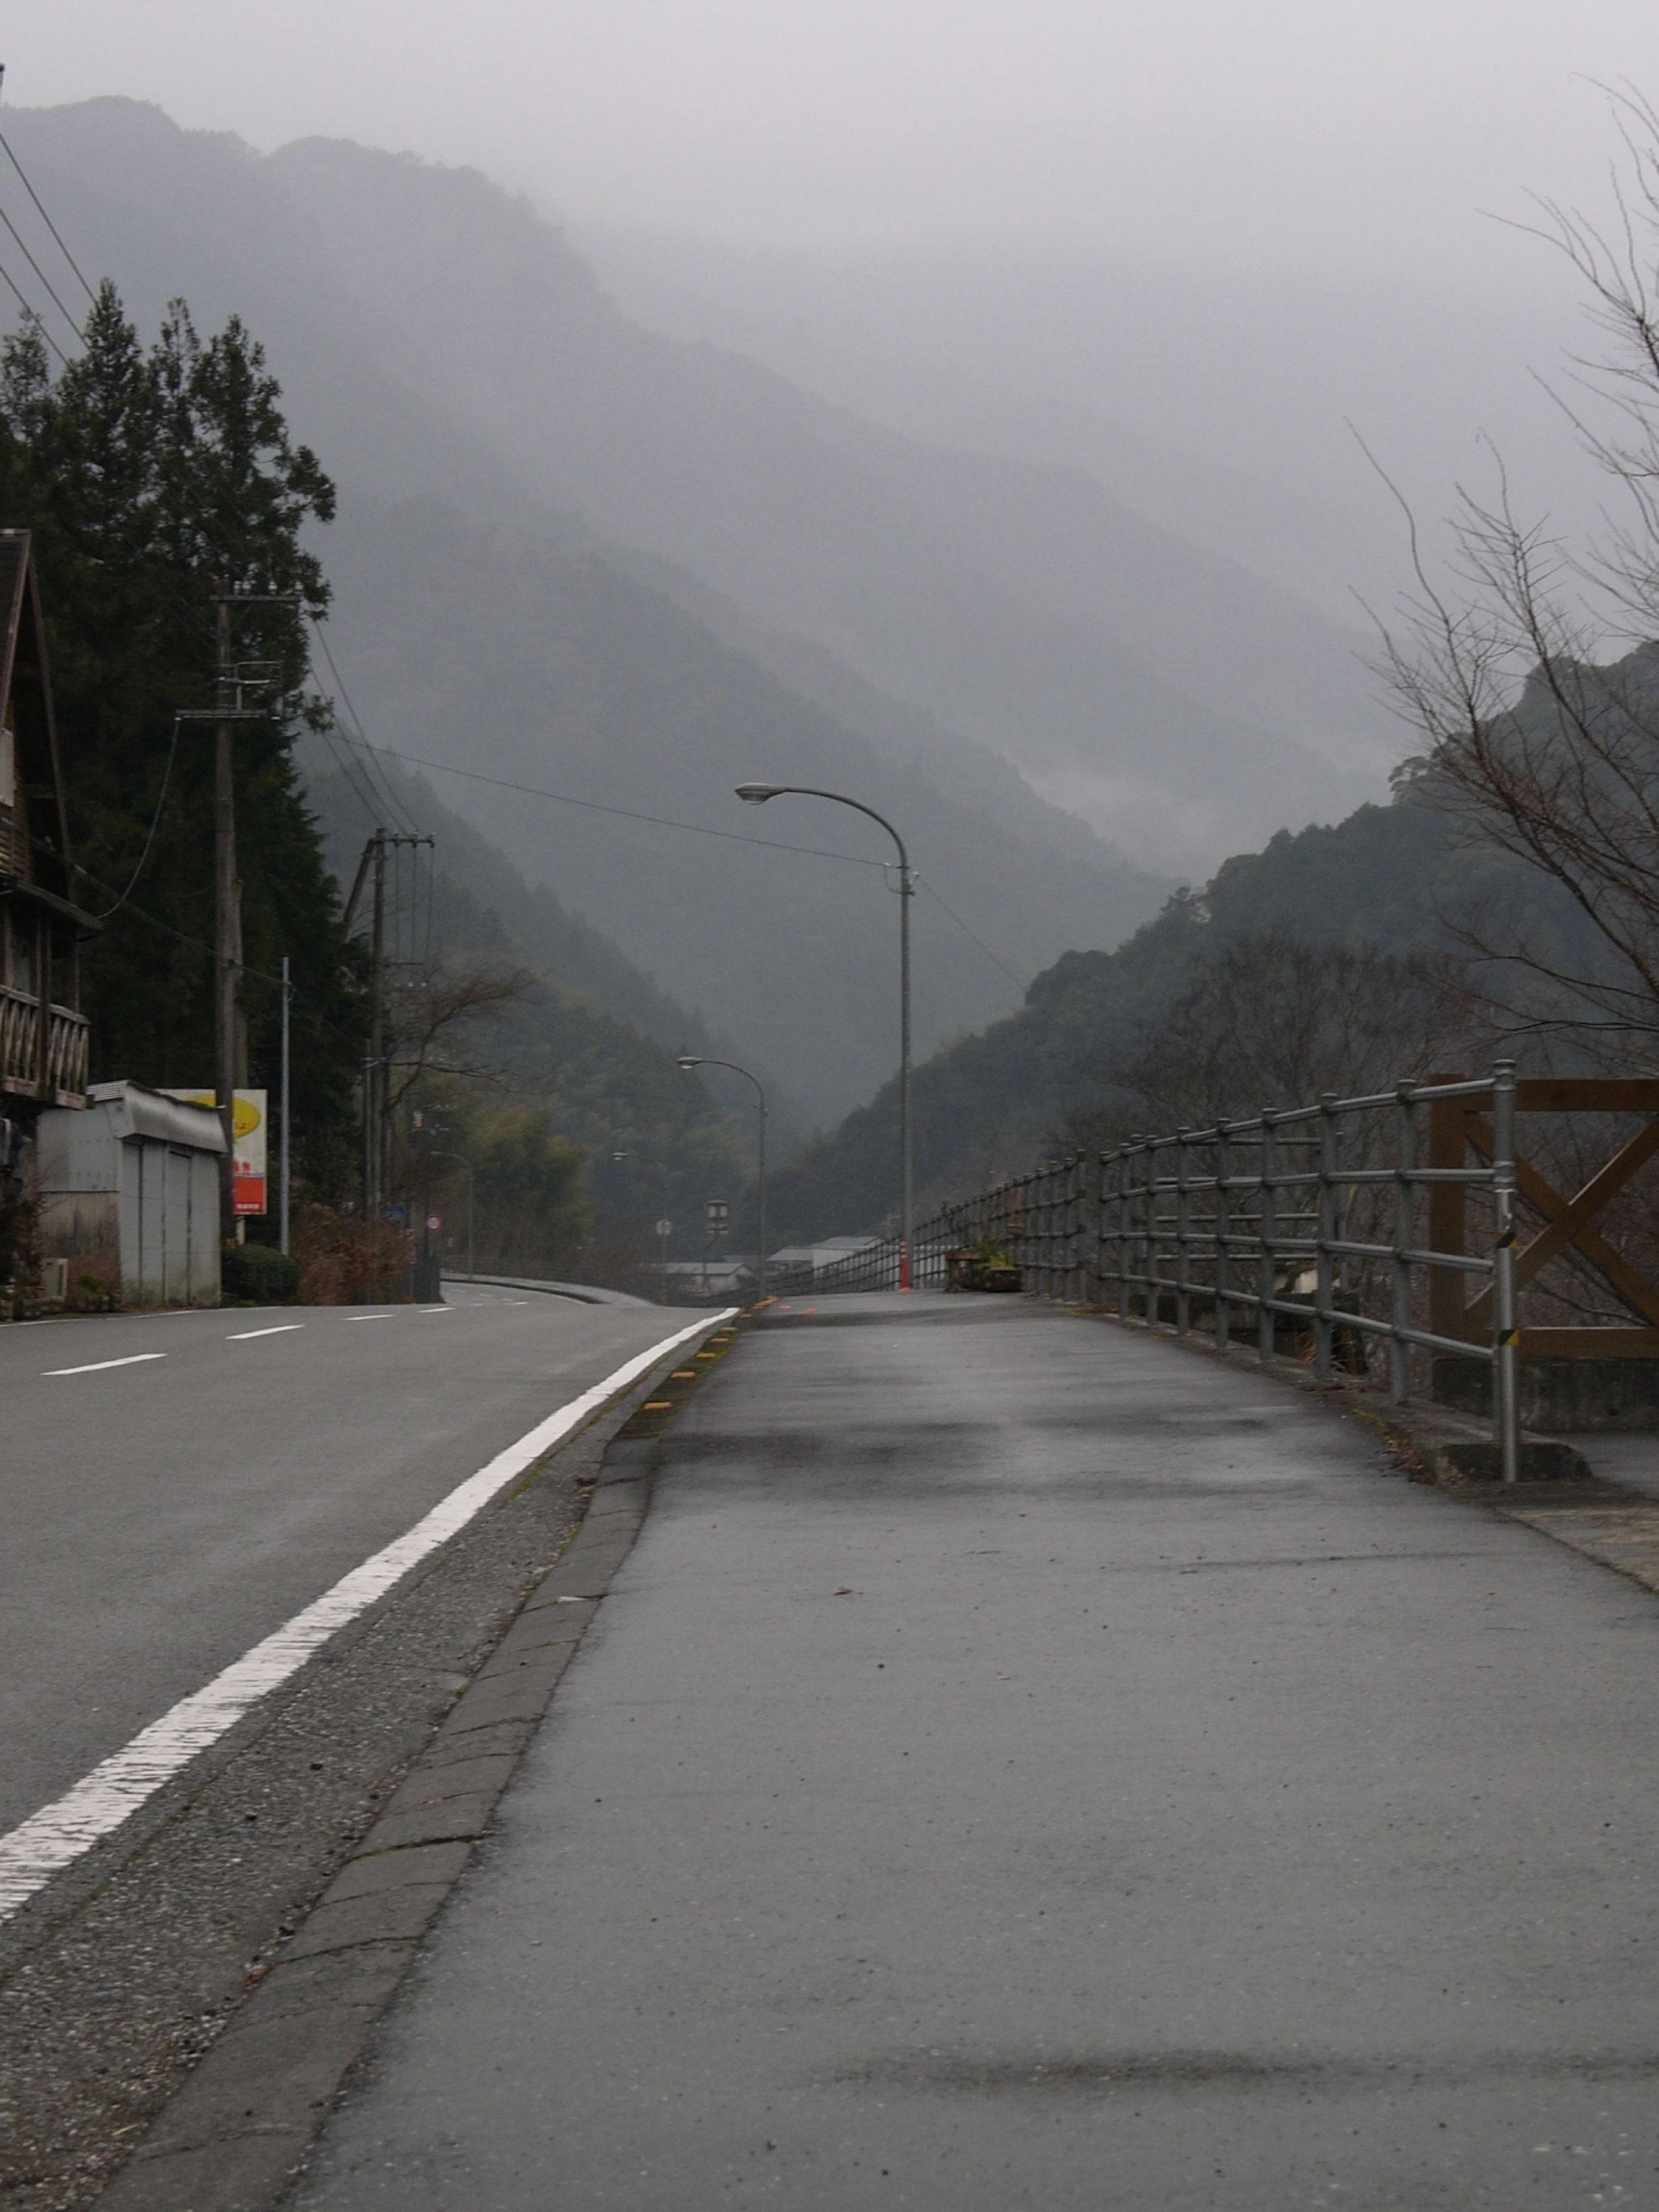 A pavement-level view of a valley overhung with low clouds.